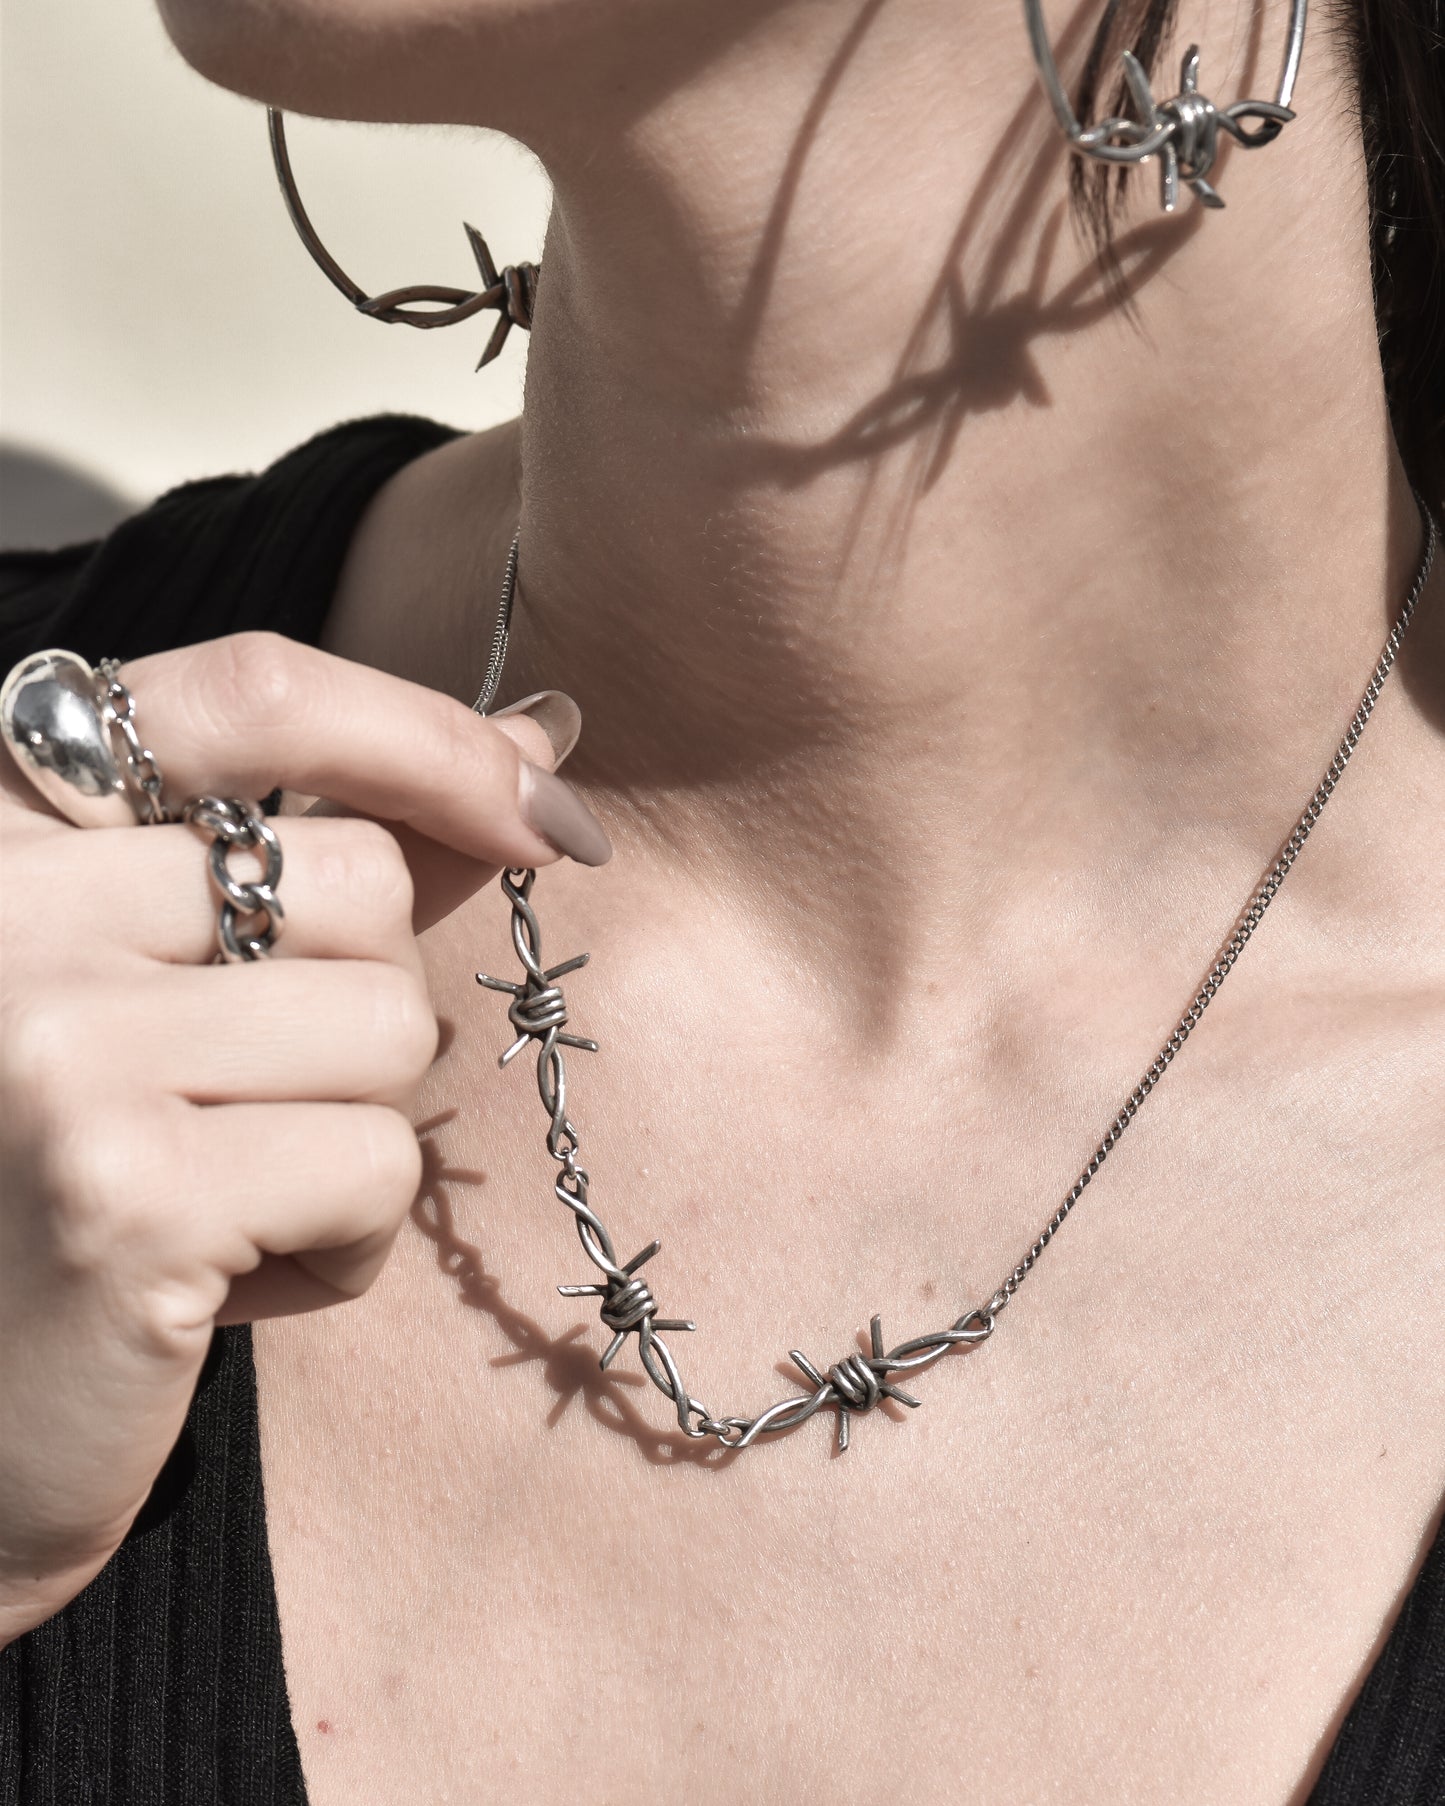 The Deadly Charm Necklace